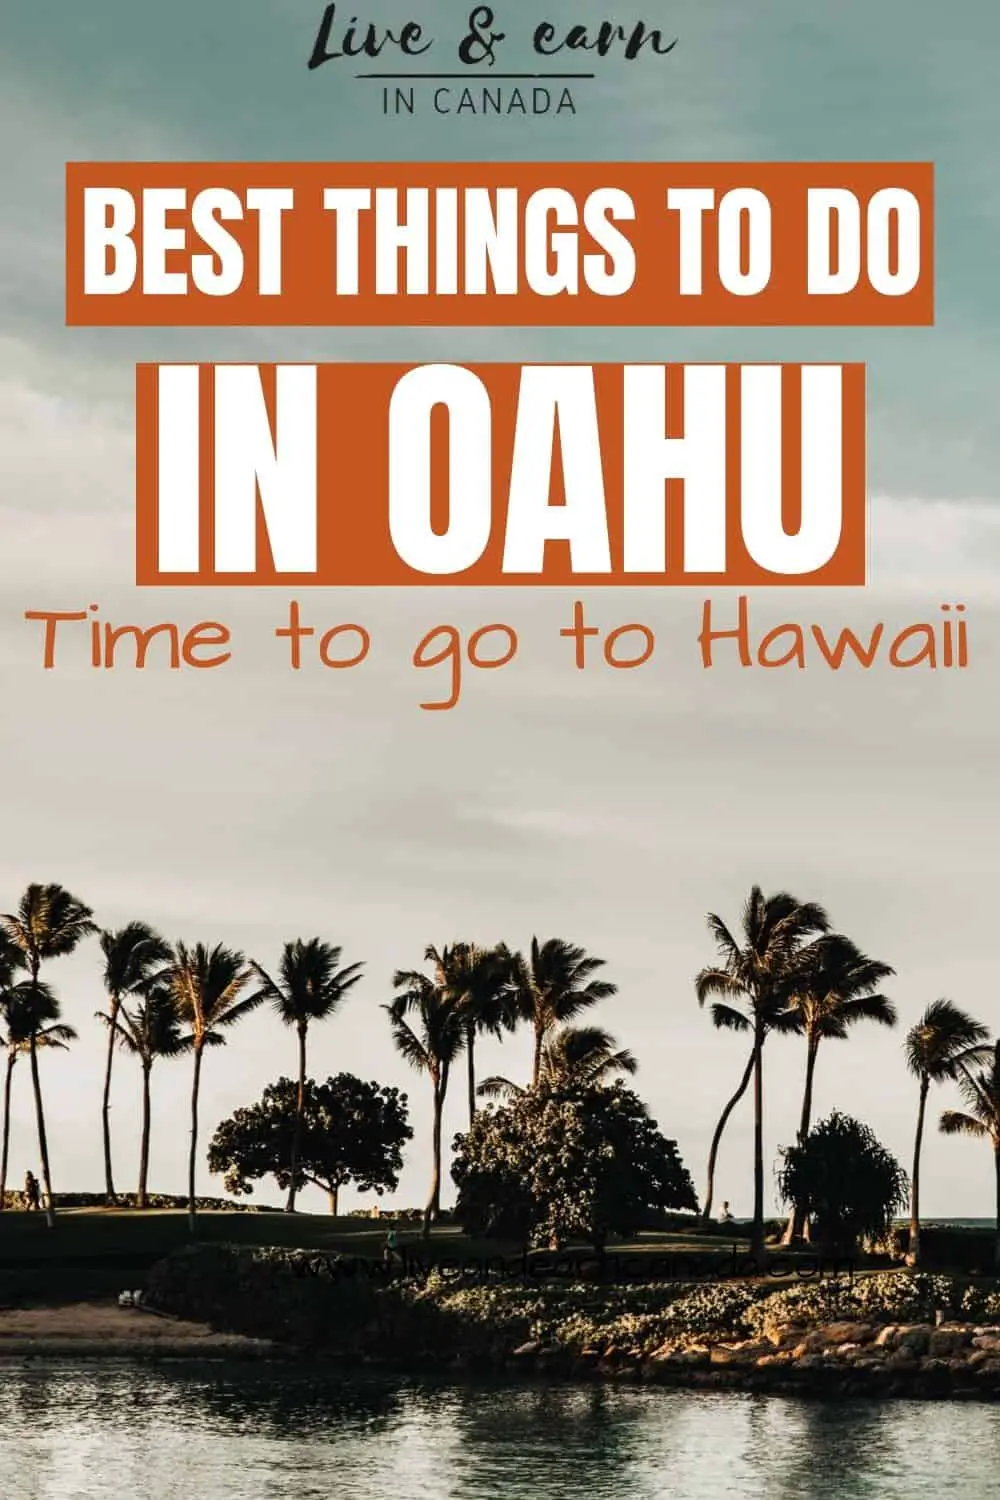 Are you looking for the best places to visit in oahu hawaii? Or things to do in oahu hawaii? Here is our top guide for activities to do in Oahu, the best food in Oahu and all the attractions! Find our full guide included here #Hawaii #Oahu #vacationinhawaii #beachtravel #traveltips